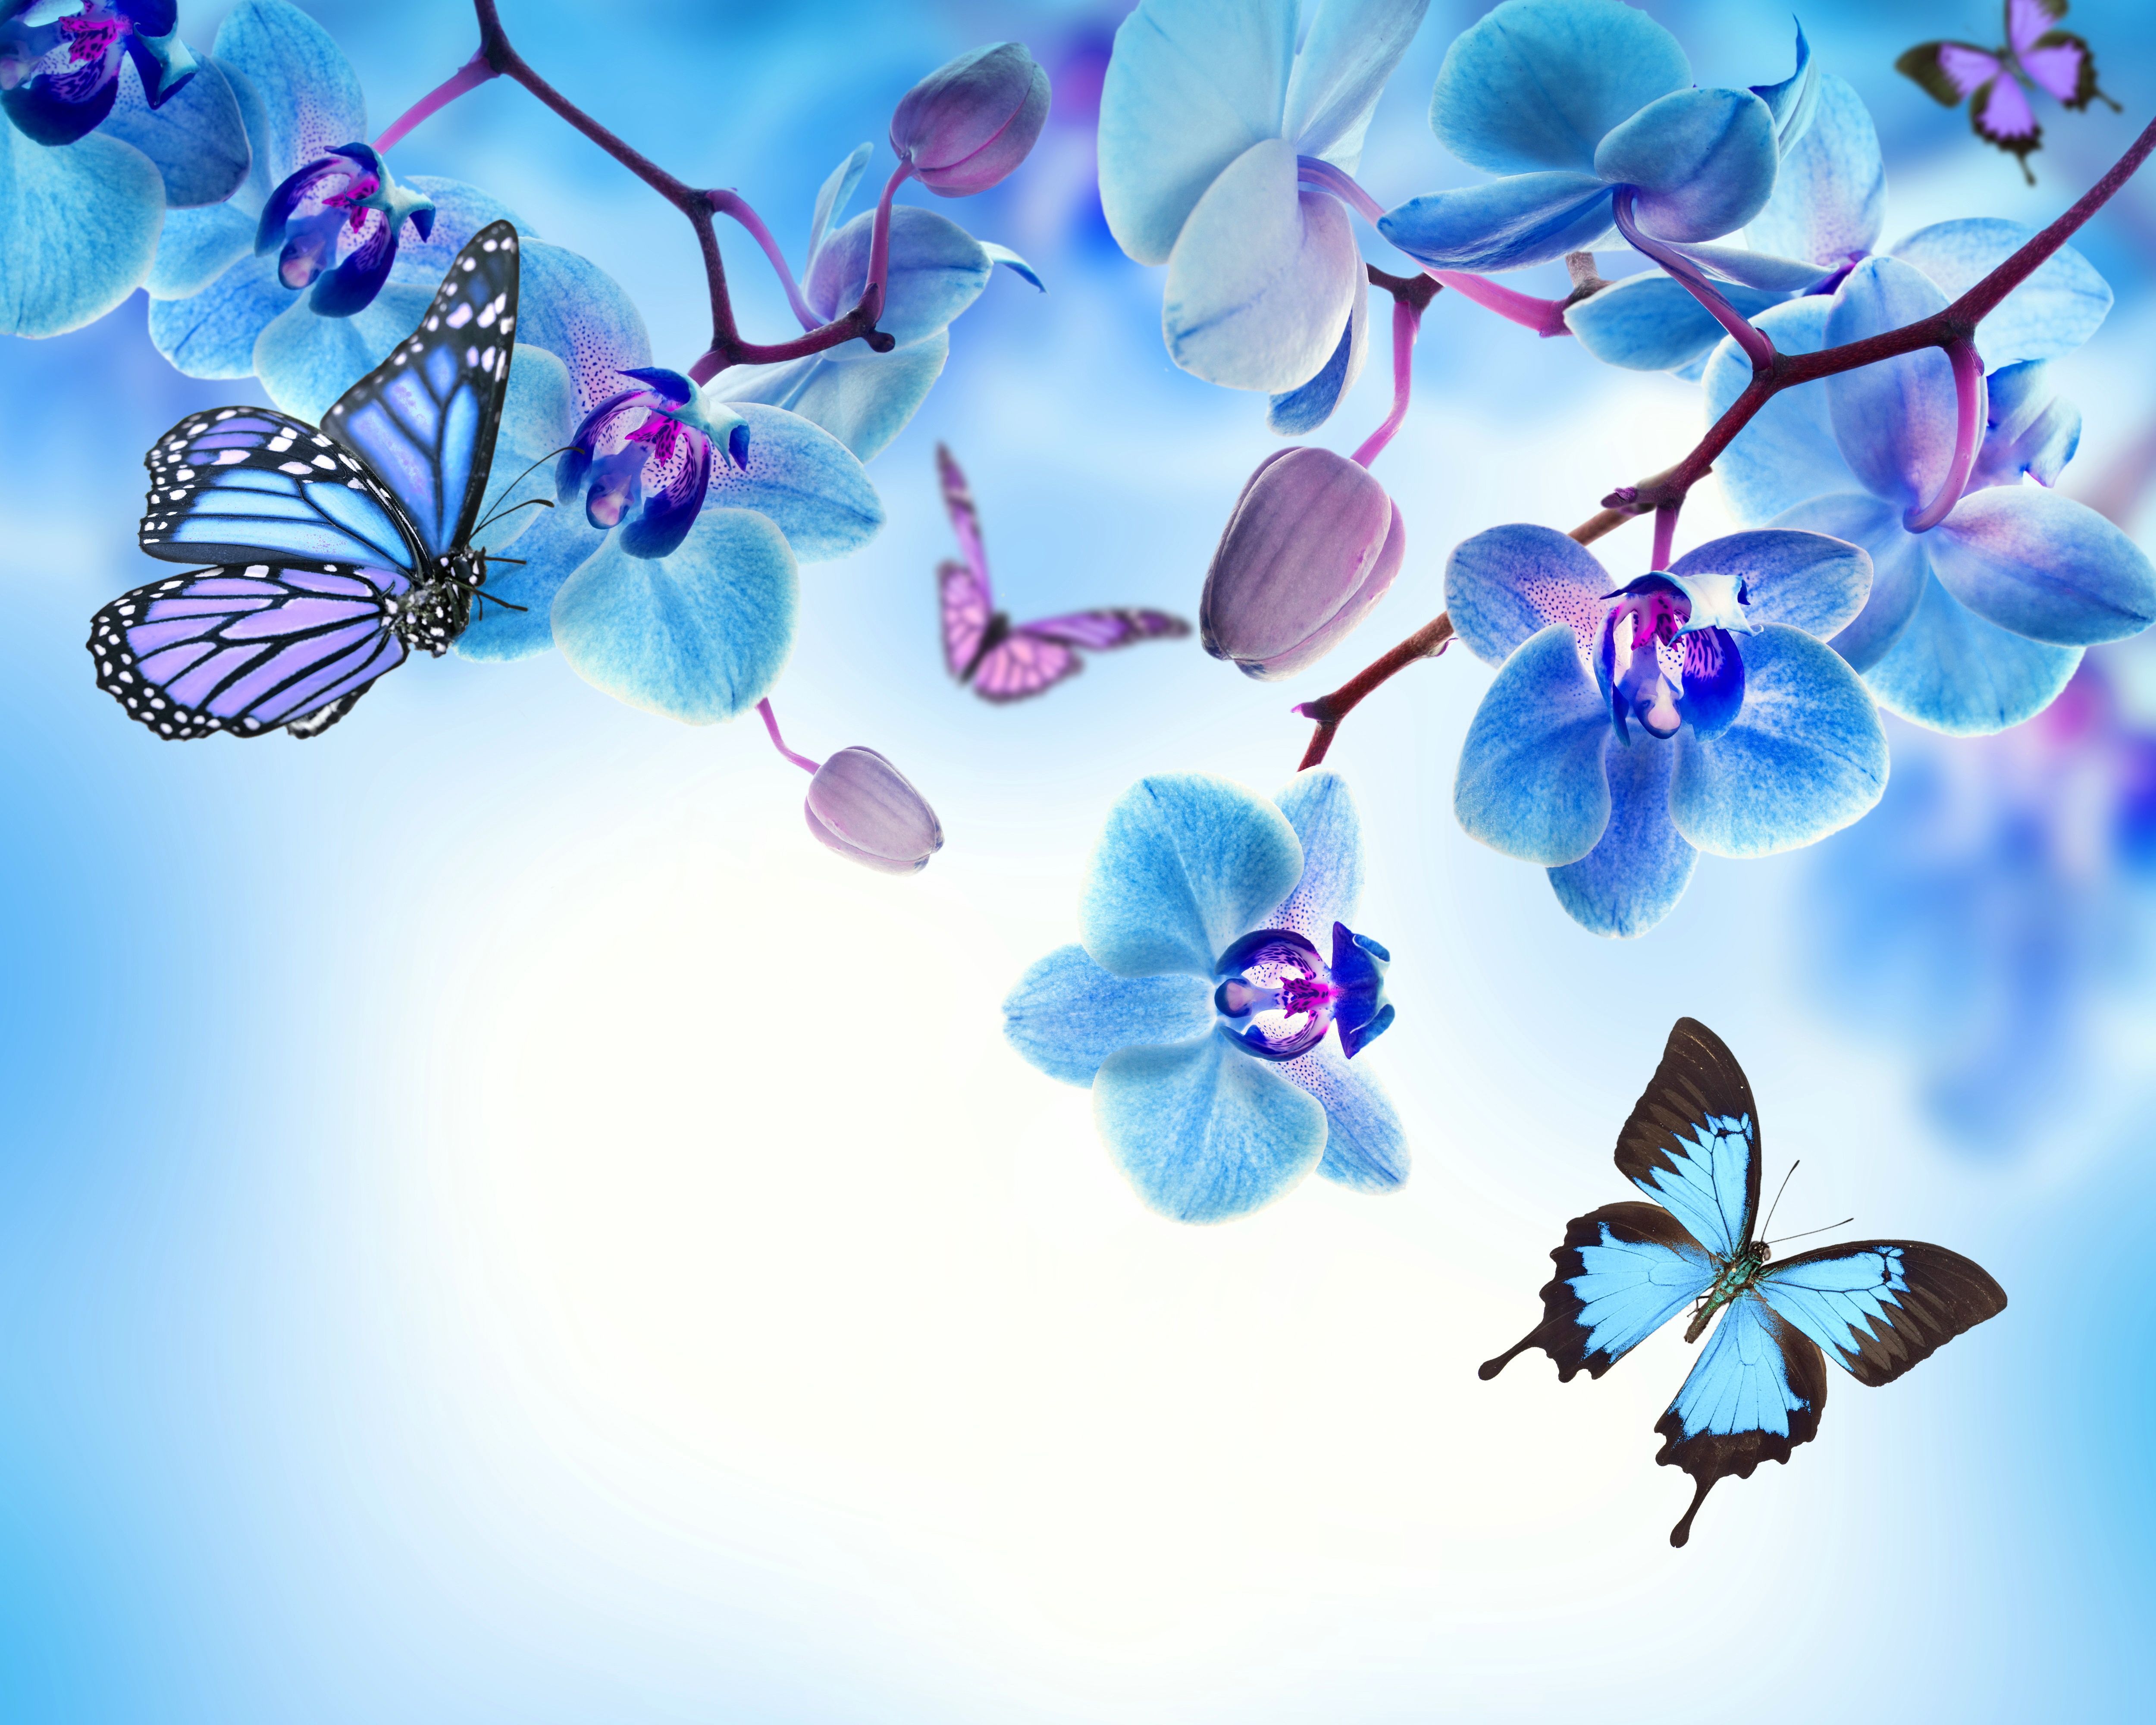 Blue Orchid Wallpaper High Quality. Download Free. Best Games